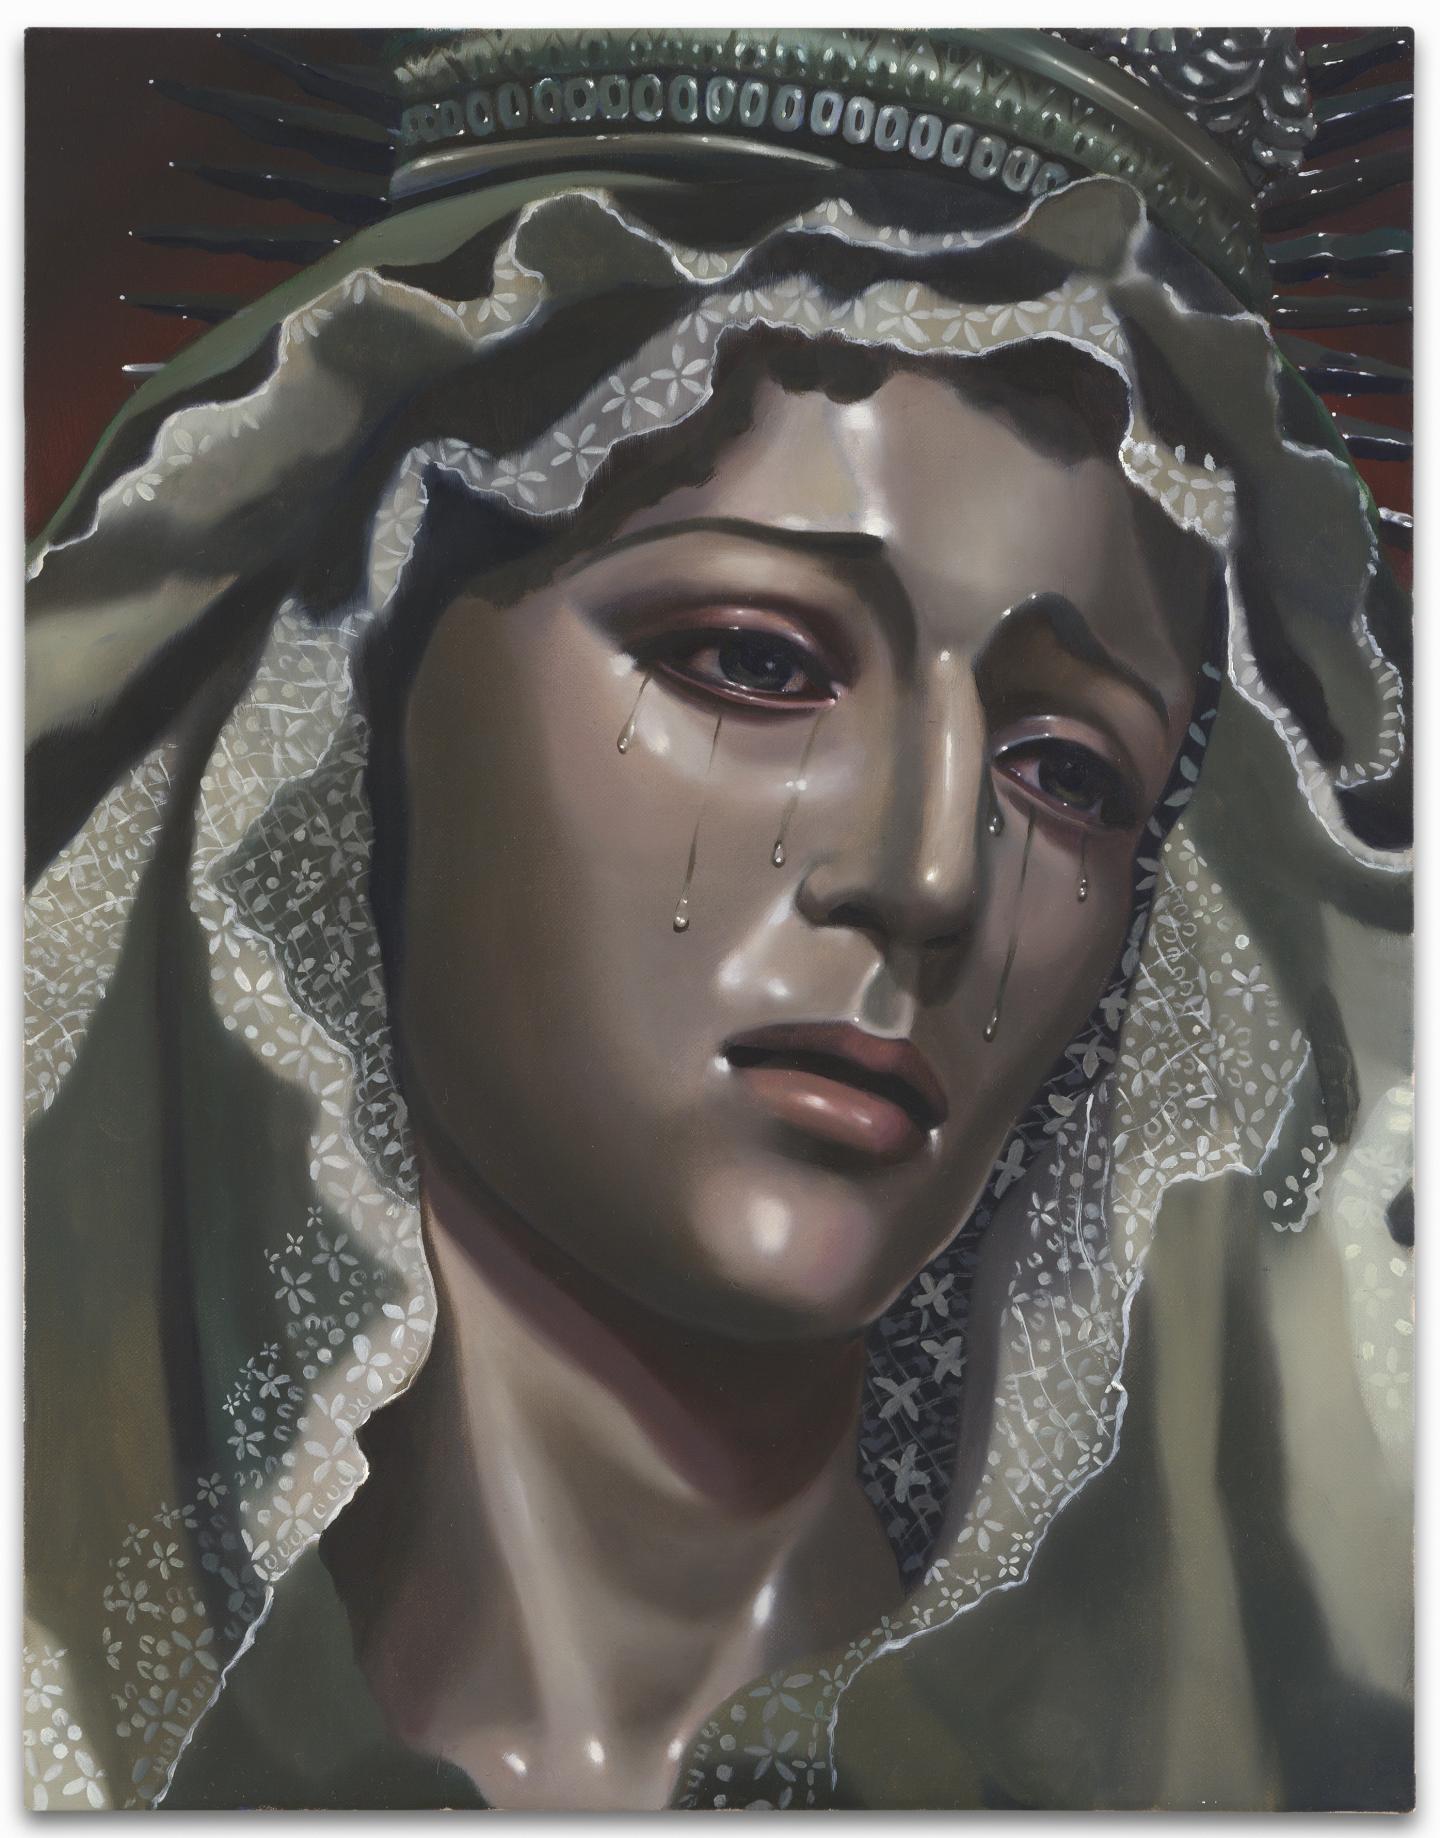 Tali Lennox, Our Lady of Sorrows, 2022. Oil on linen